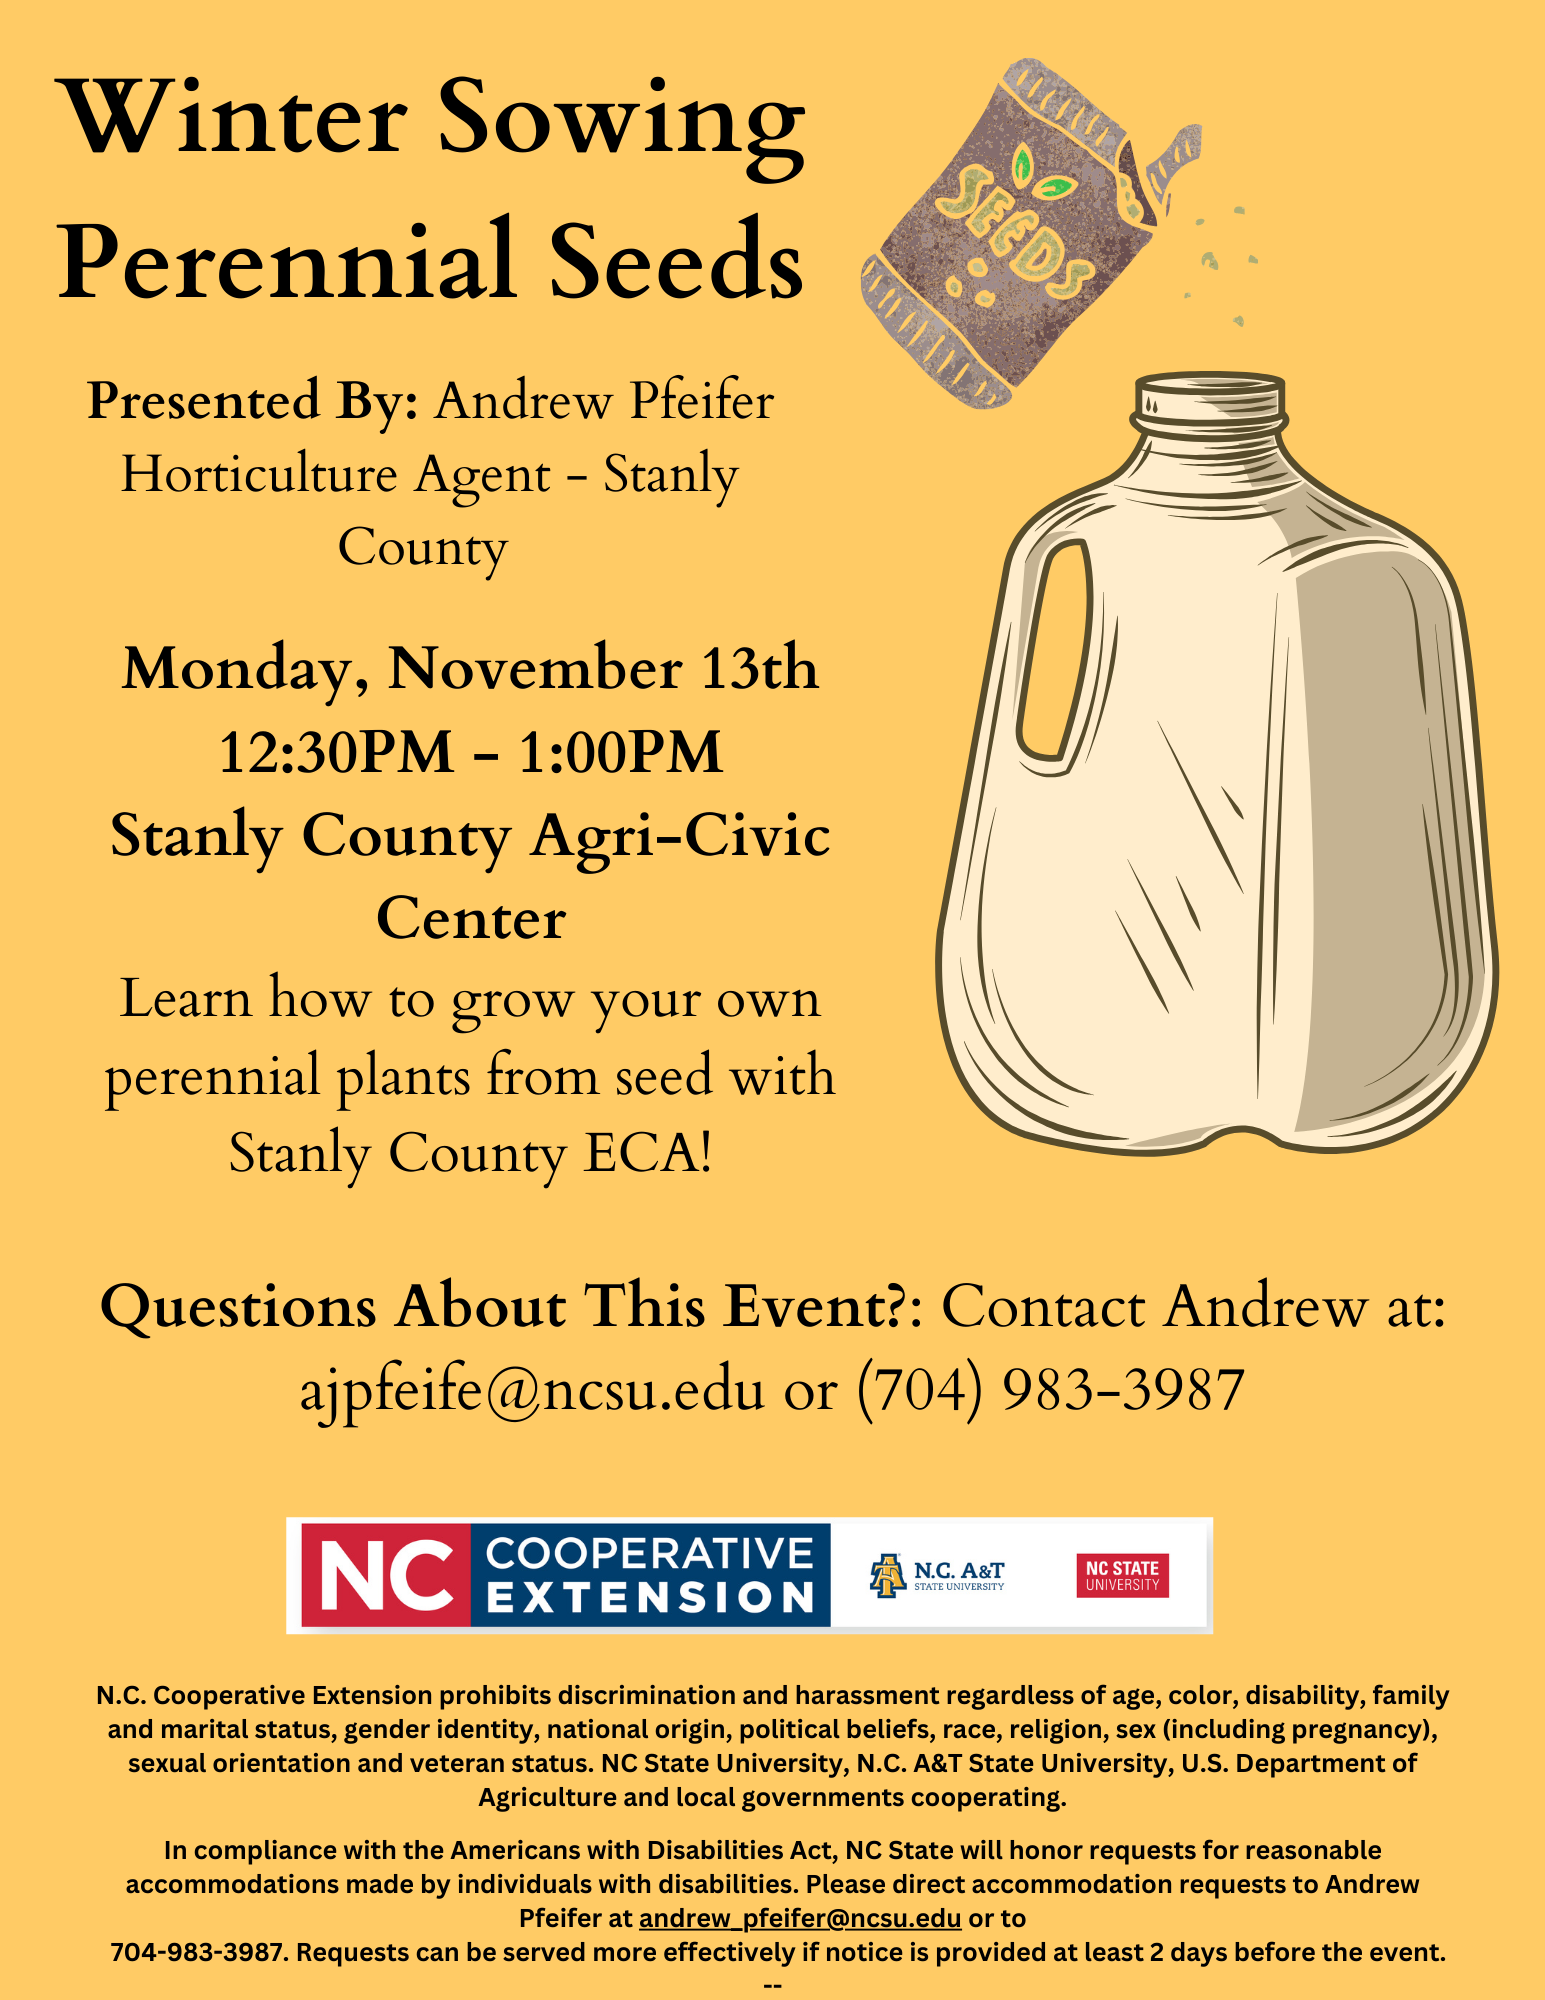 Winter Sowing Perennial Seeds, Presented By: Andrew Pfeifer Horticulture Agent - Stanly County,Monday, November 13th 12:30 p.m. - 1:00 p.m. Stanly County Agri-Civic Center, Learn how to grow your own perennial plants from seed with Stanly County ECA! Questions About This Event?: Contact Andrew at: ajpfeife@ncsu.edu or (704) 983-3987